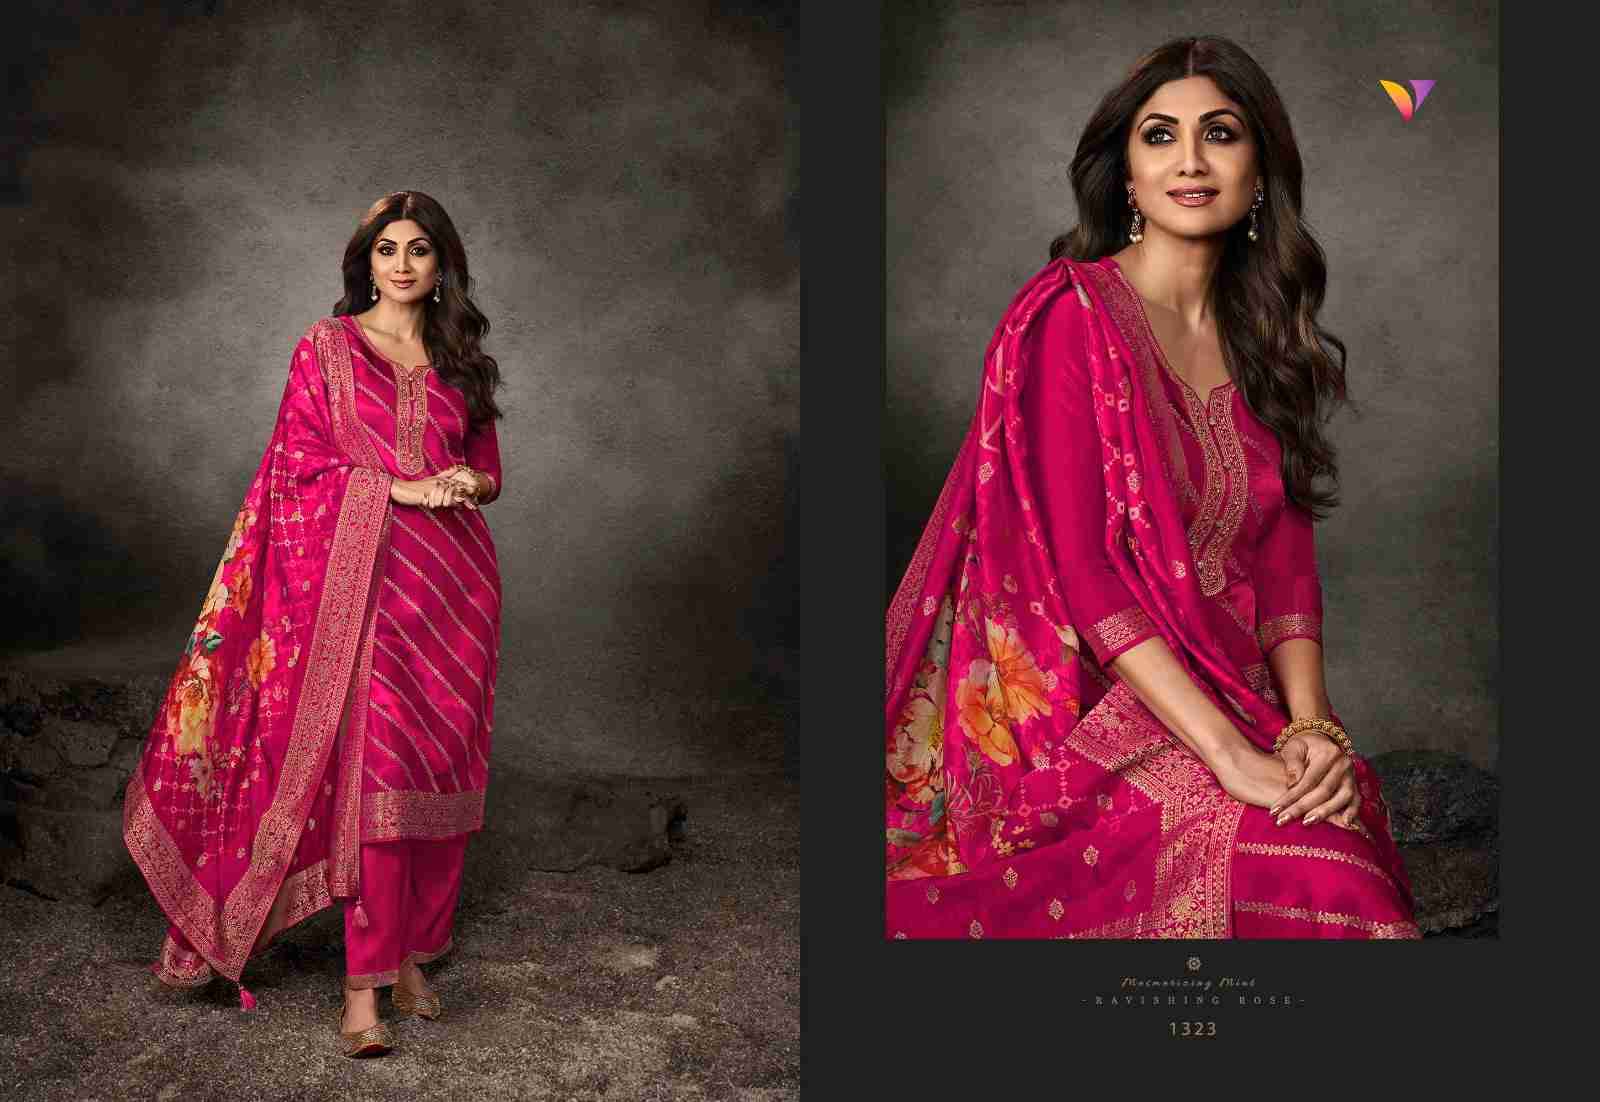 Shilpa Vol-11 By Vatsam 1321 To 1324 Series Beautiful Suits Colorful Stylish Fancy Casual Wear & Ethnic Wear Pure Viscose Jacquard Dresses At Wholesale Price